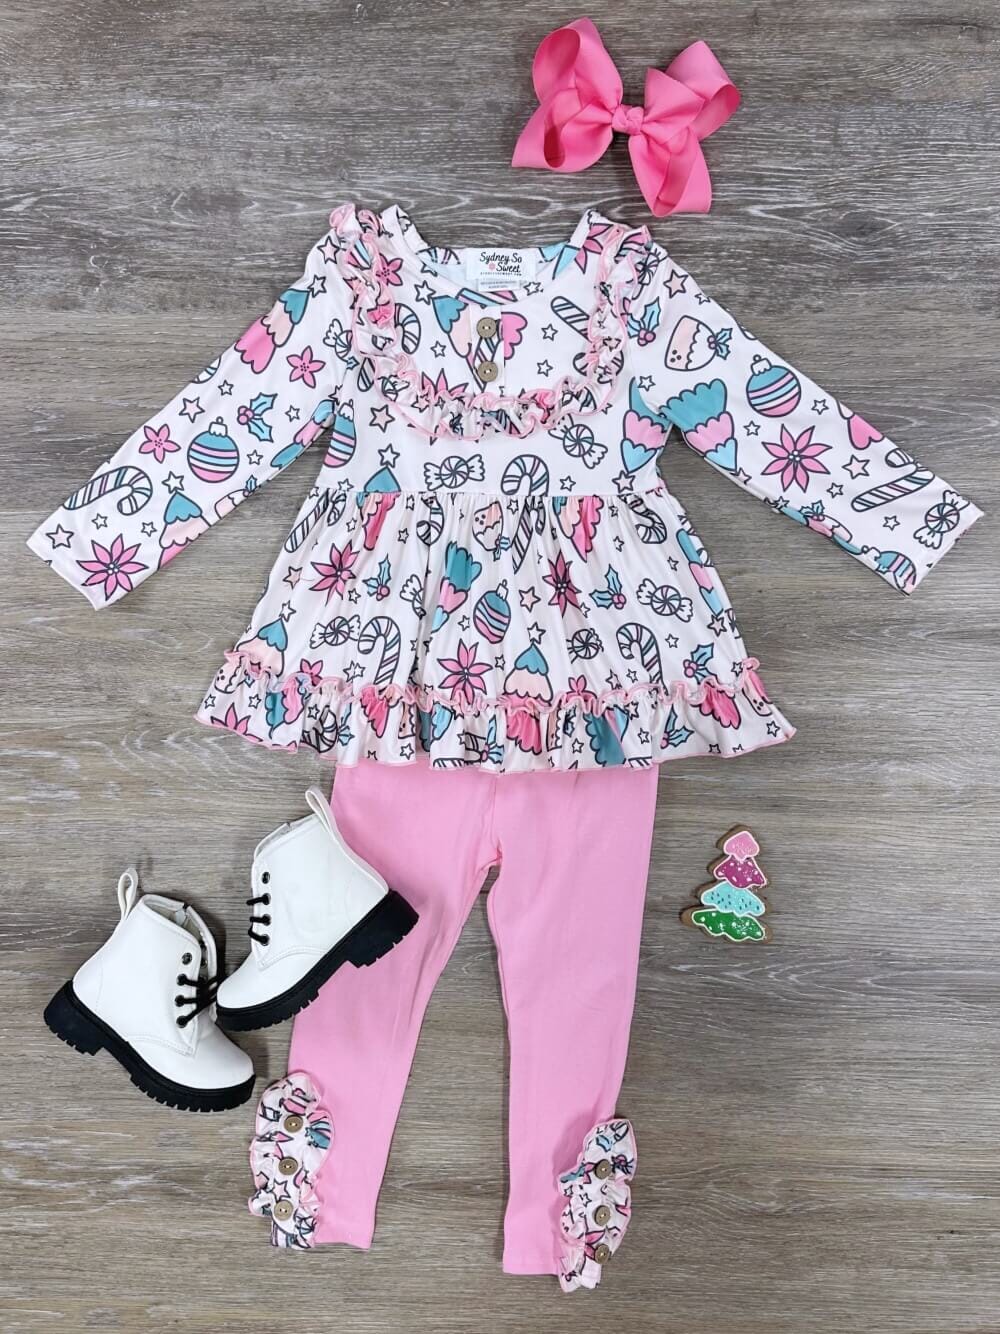 Girl's Denim Outfits, Sydney So Sweet Boutique, Ships Free